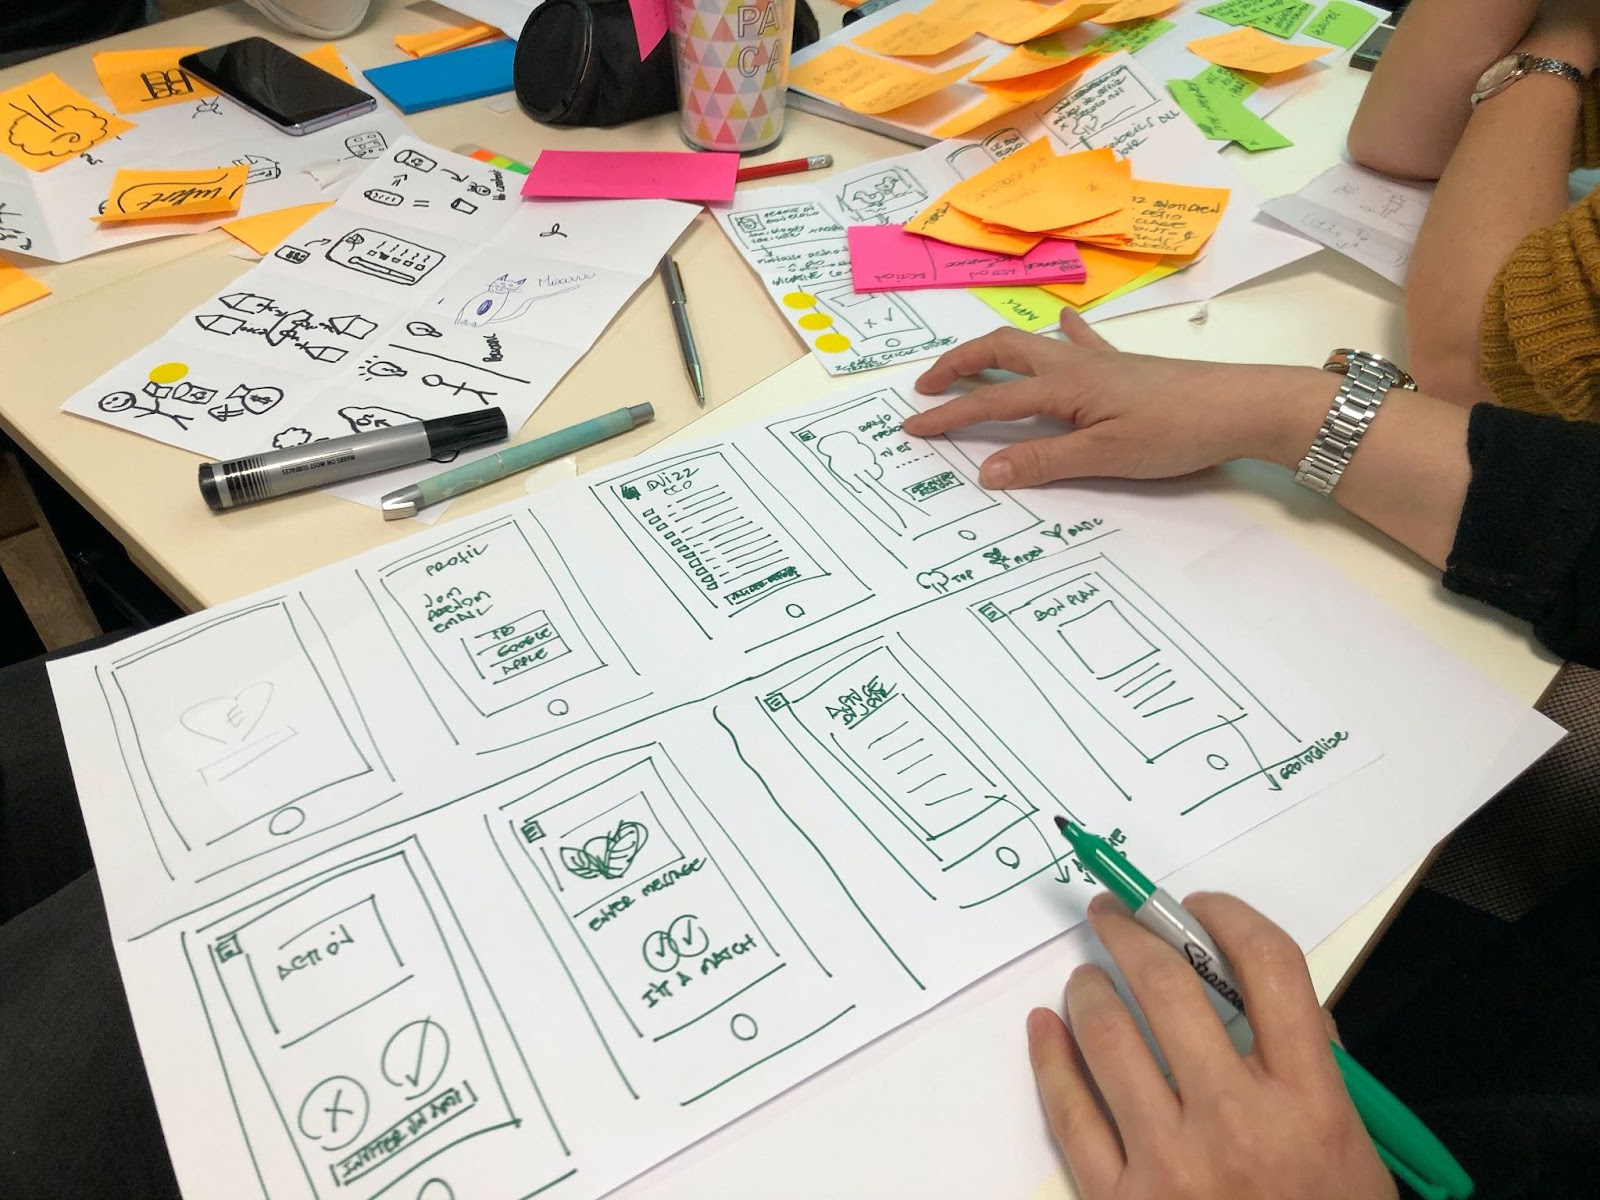 Design thinking is important when prototyping products and services. This is a photo of prototypes being sketched out.